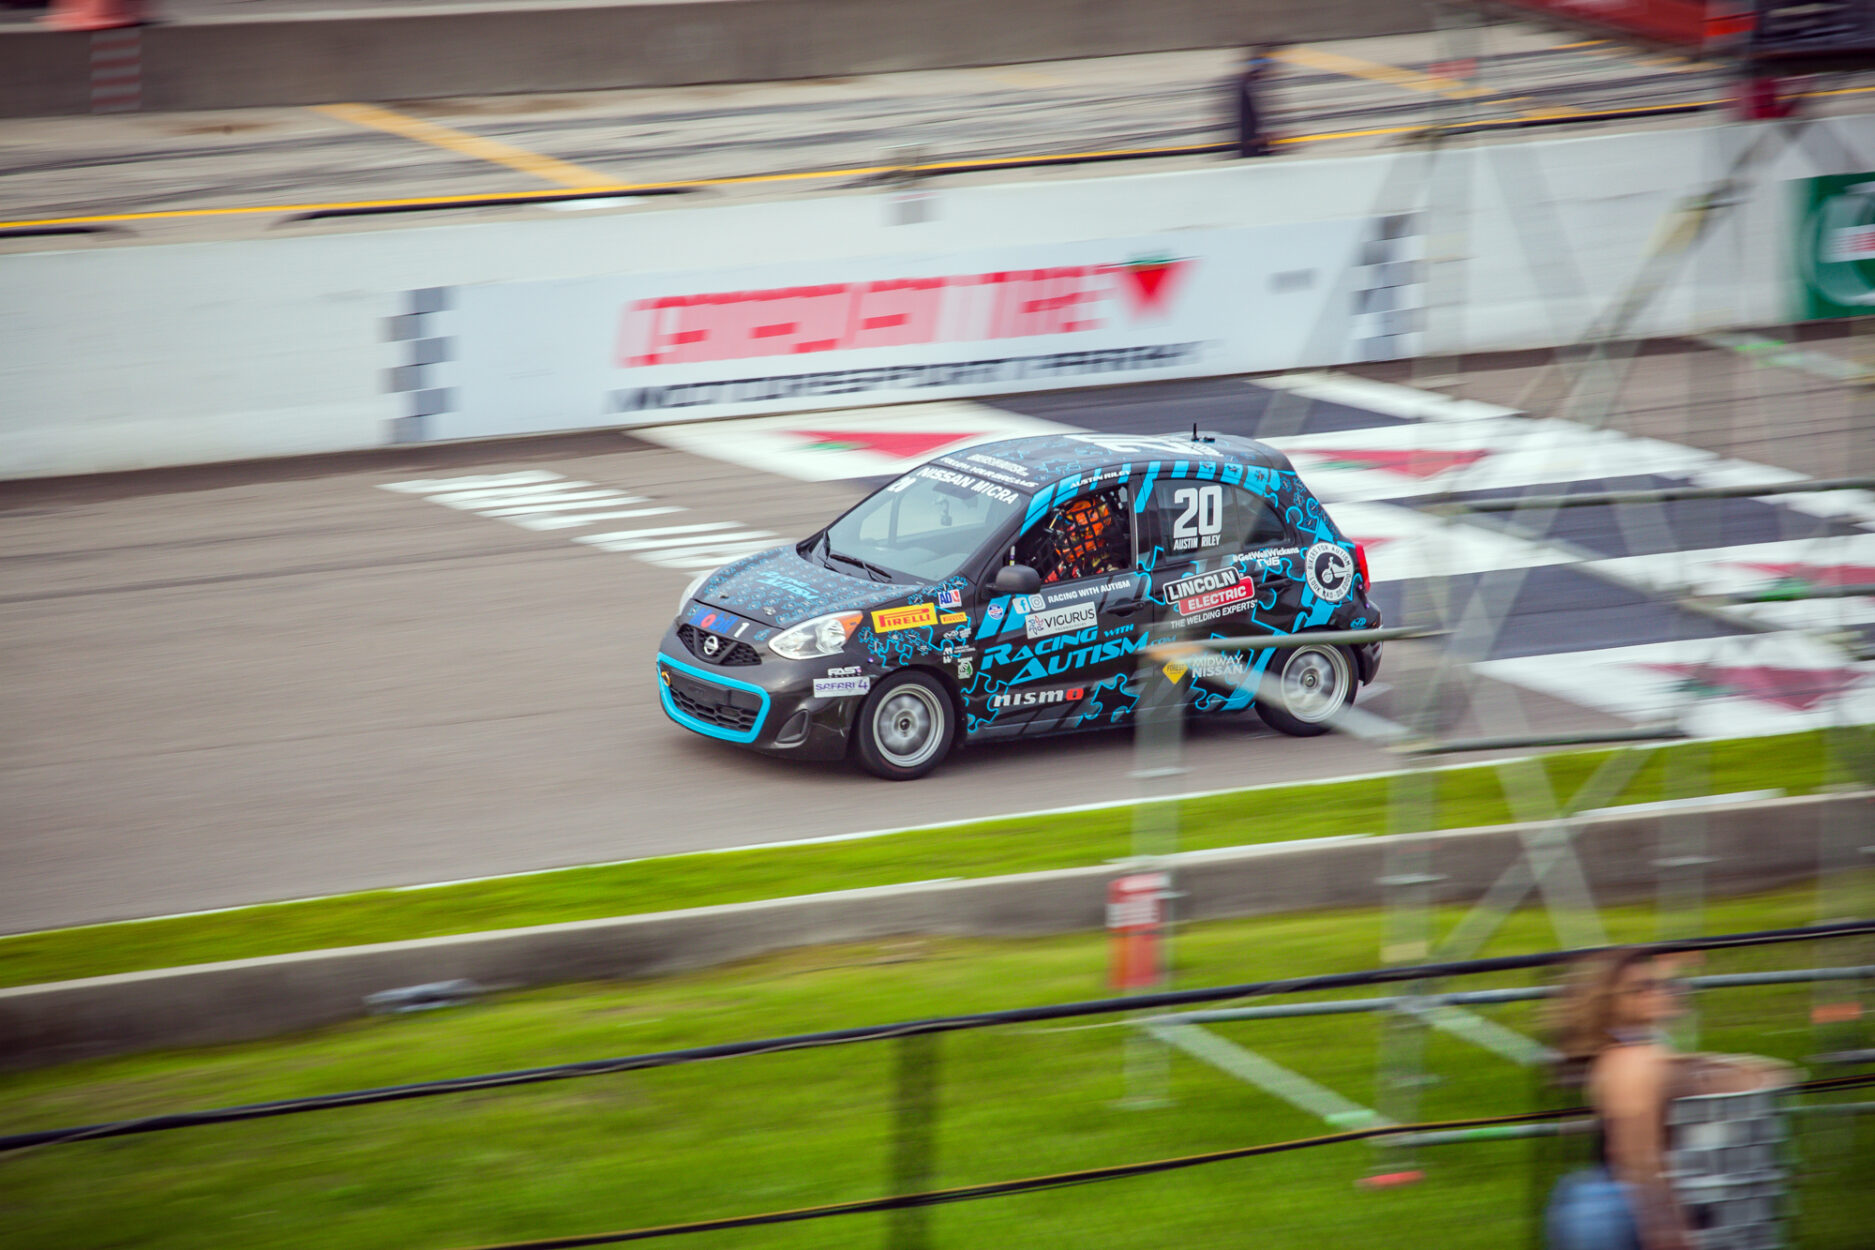 Track testing the Nissan Micra Cup car